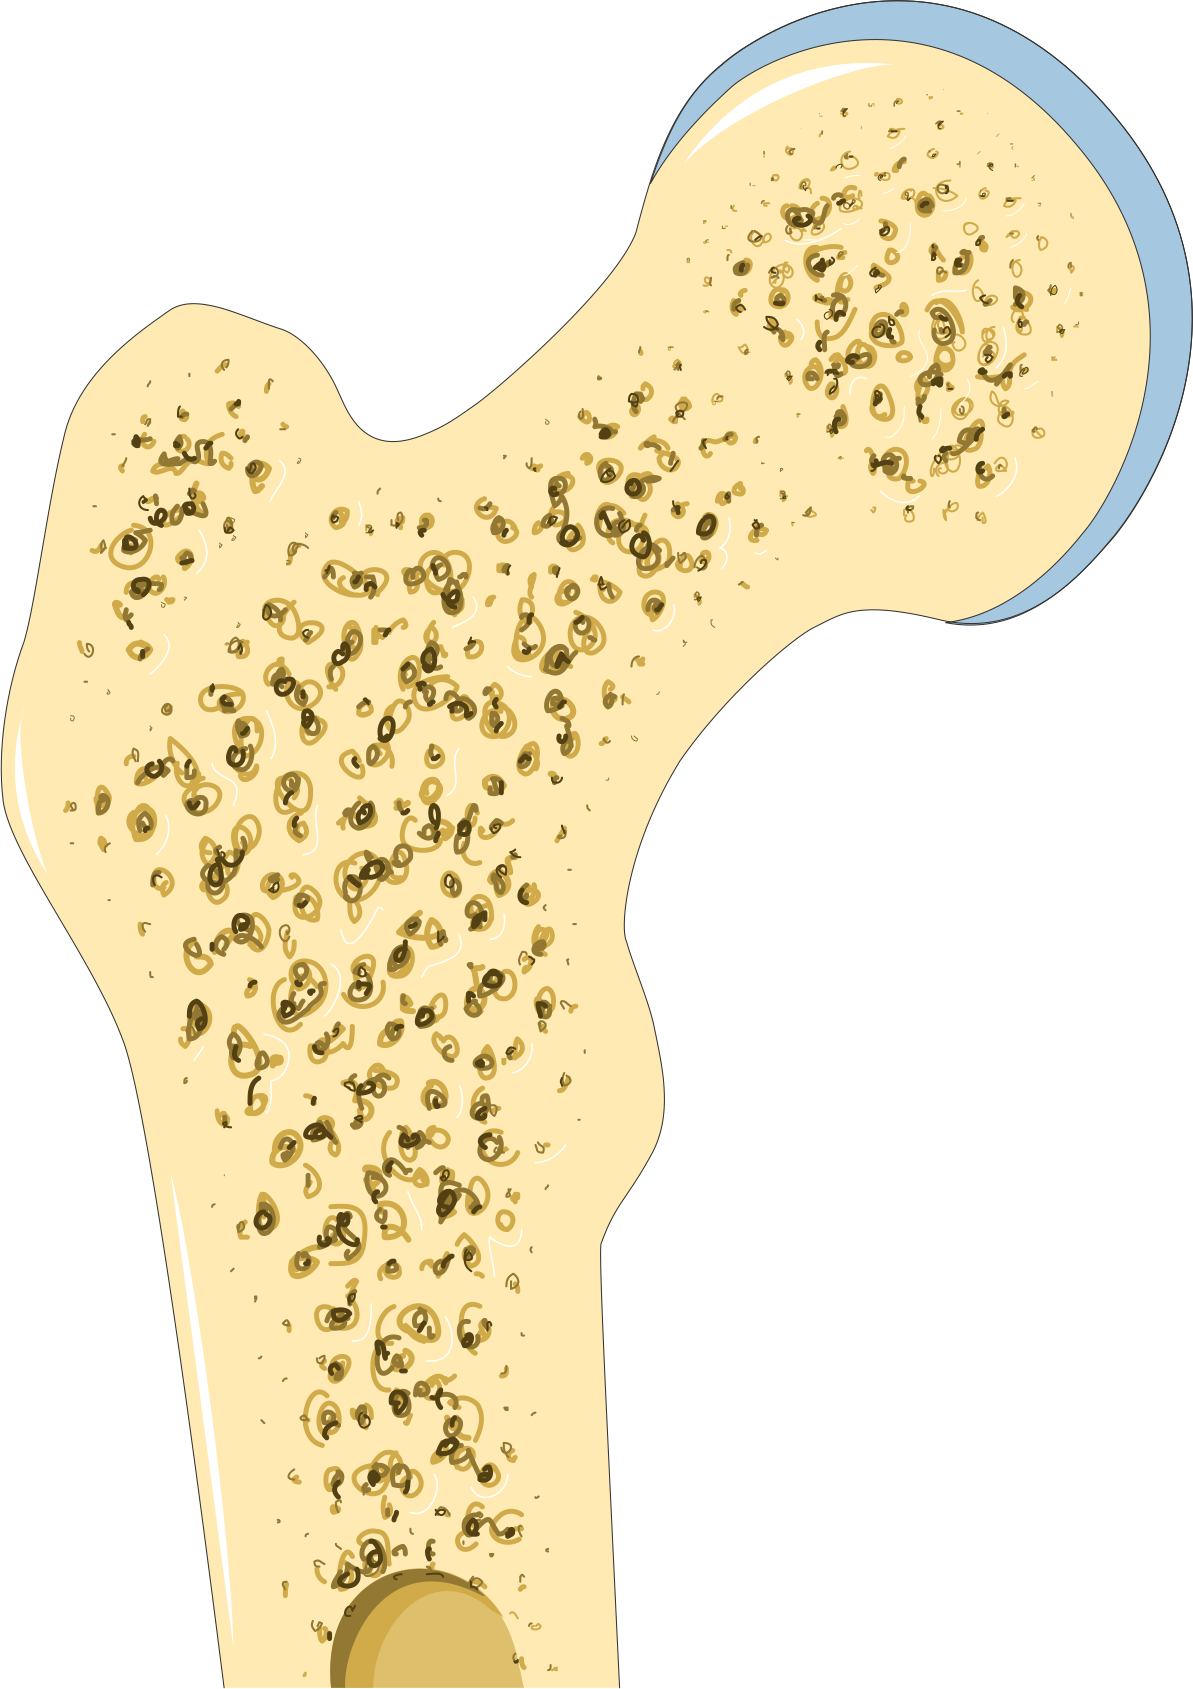 File:Osteoporosis 3 -- Smart-Servier.png - Wikimedia Commons